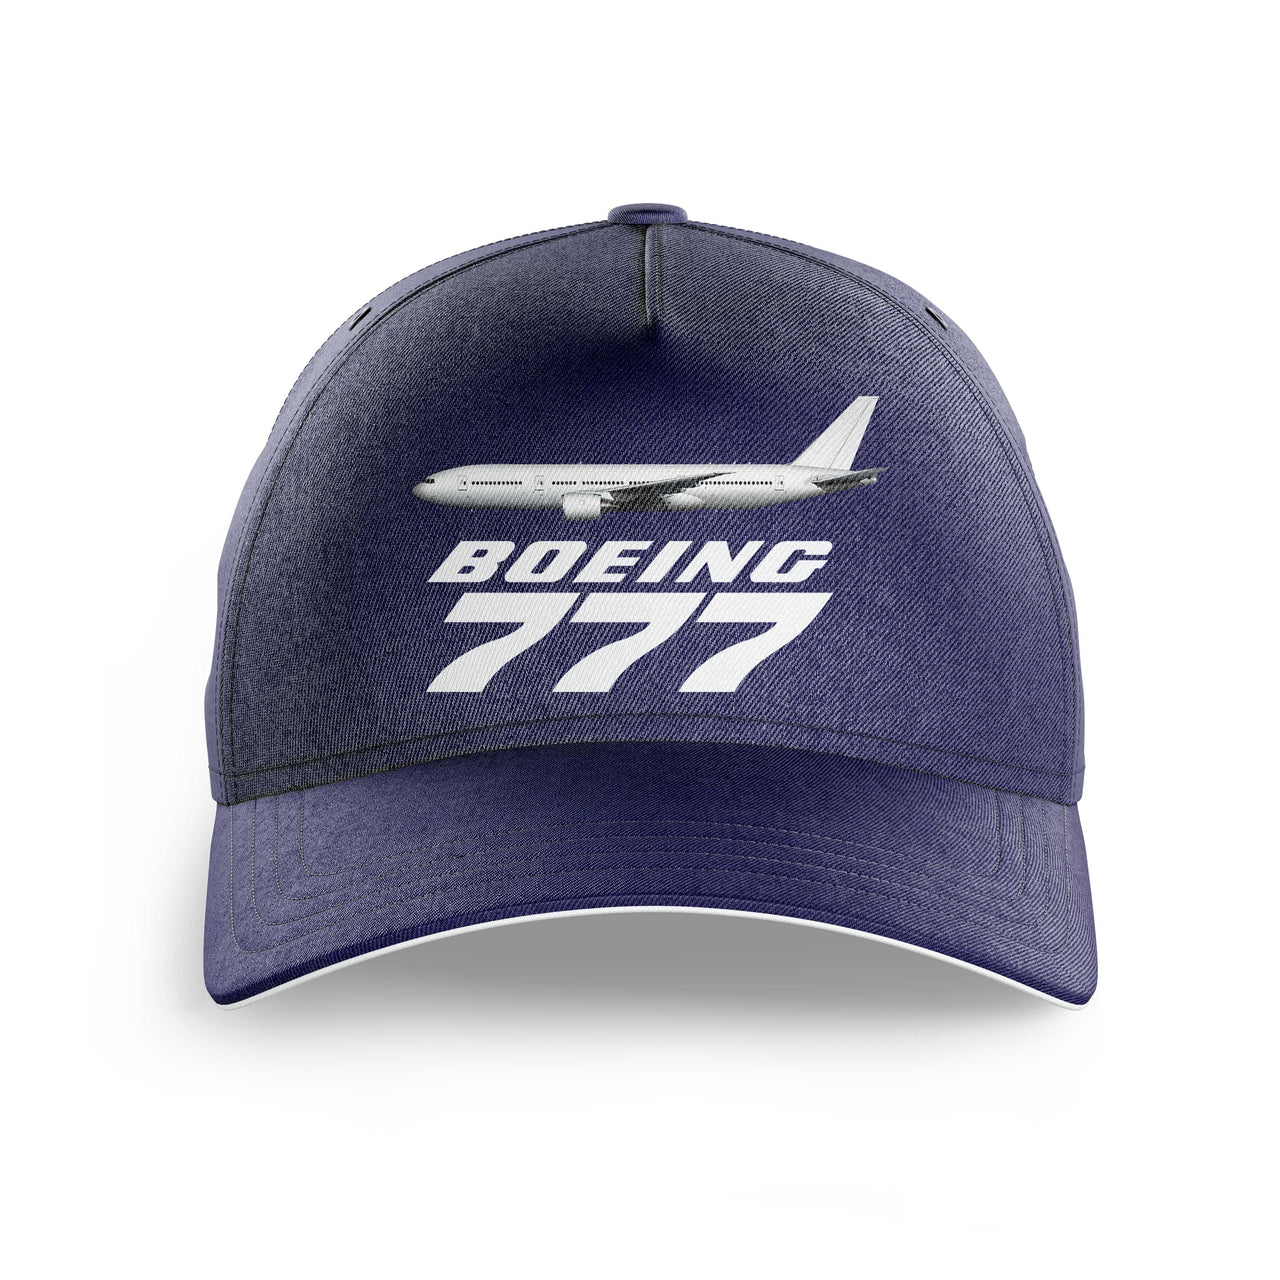 The Boeing 777 Printed Hats